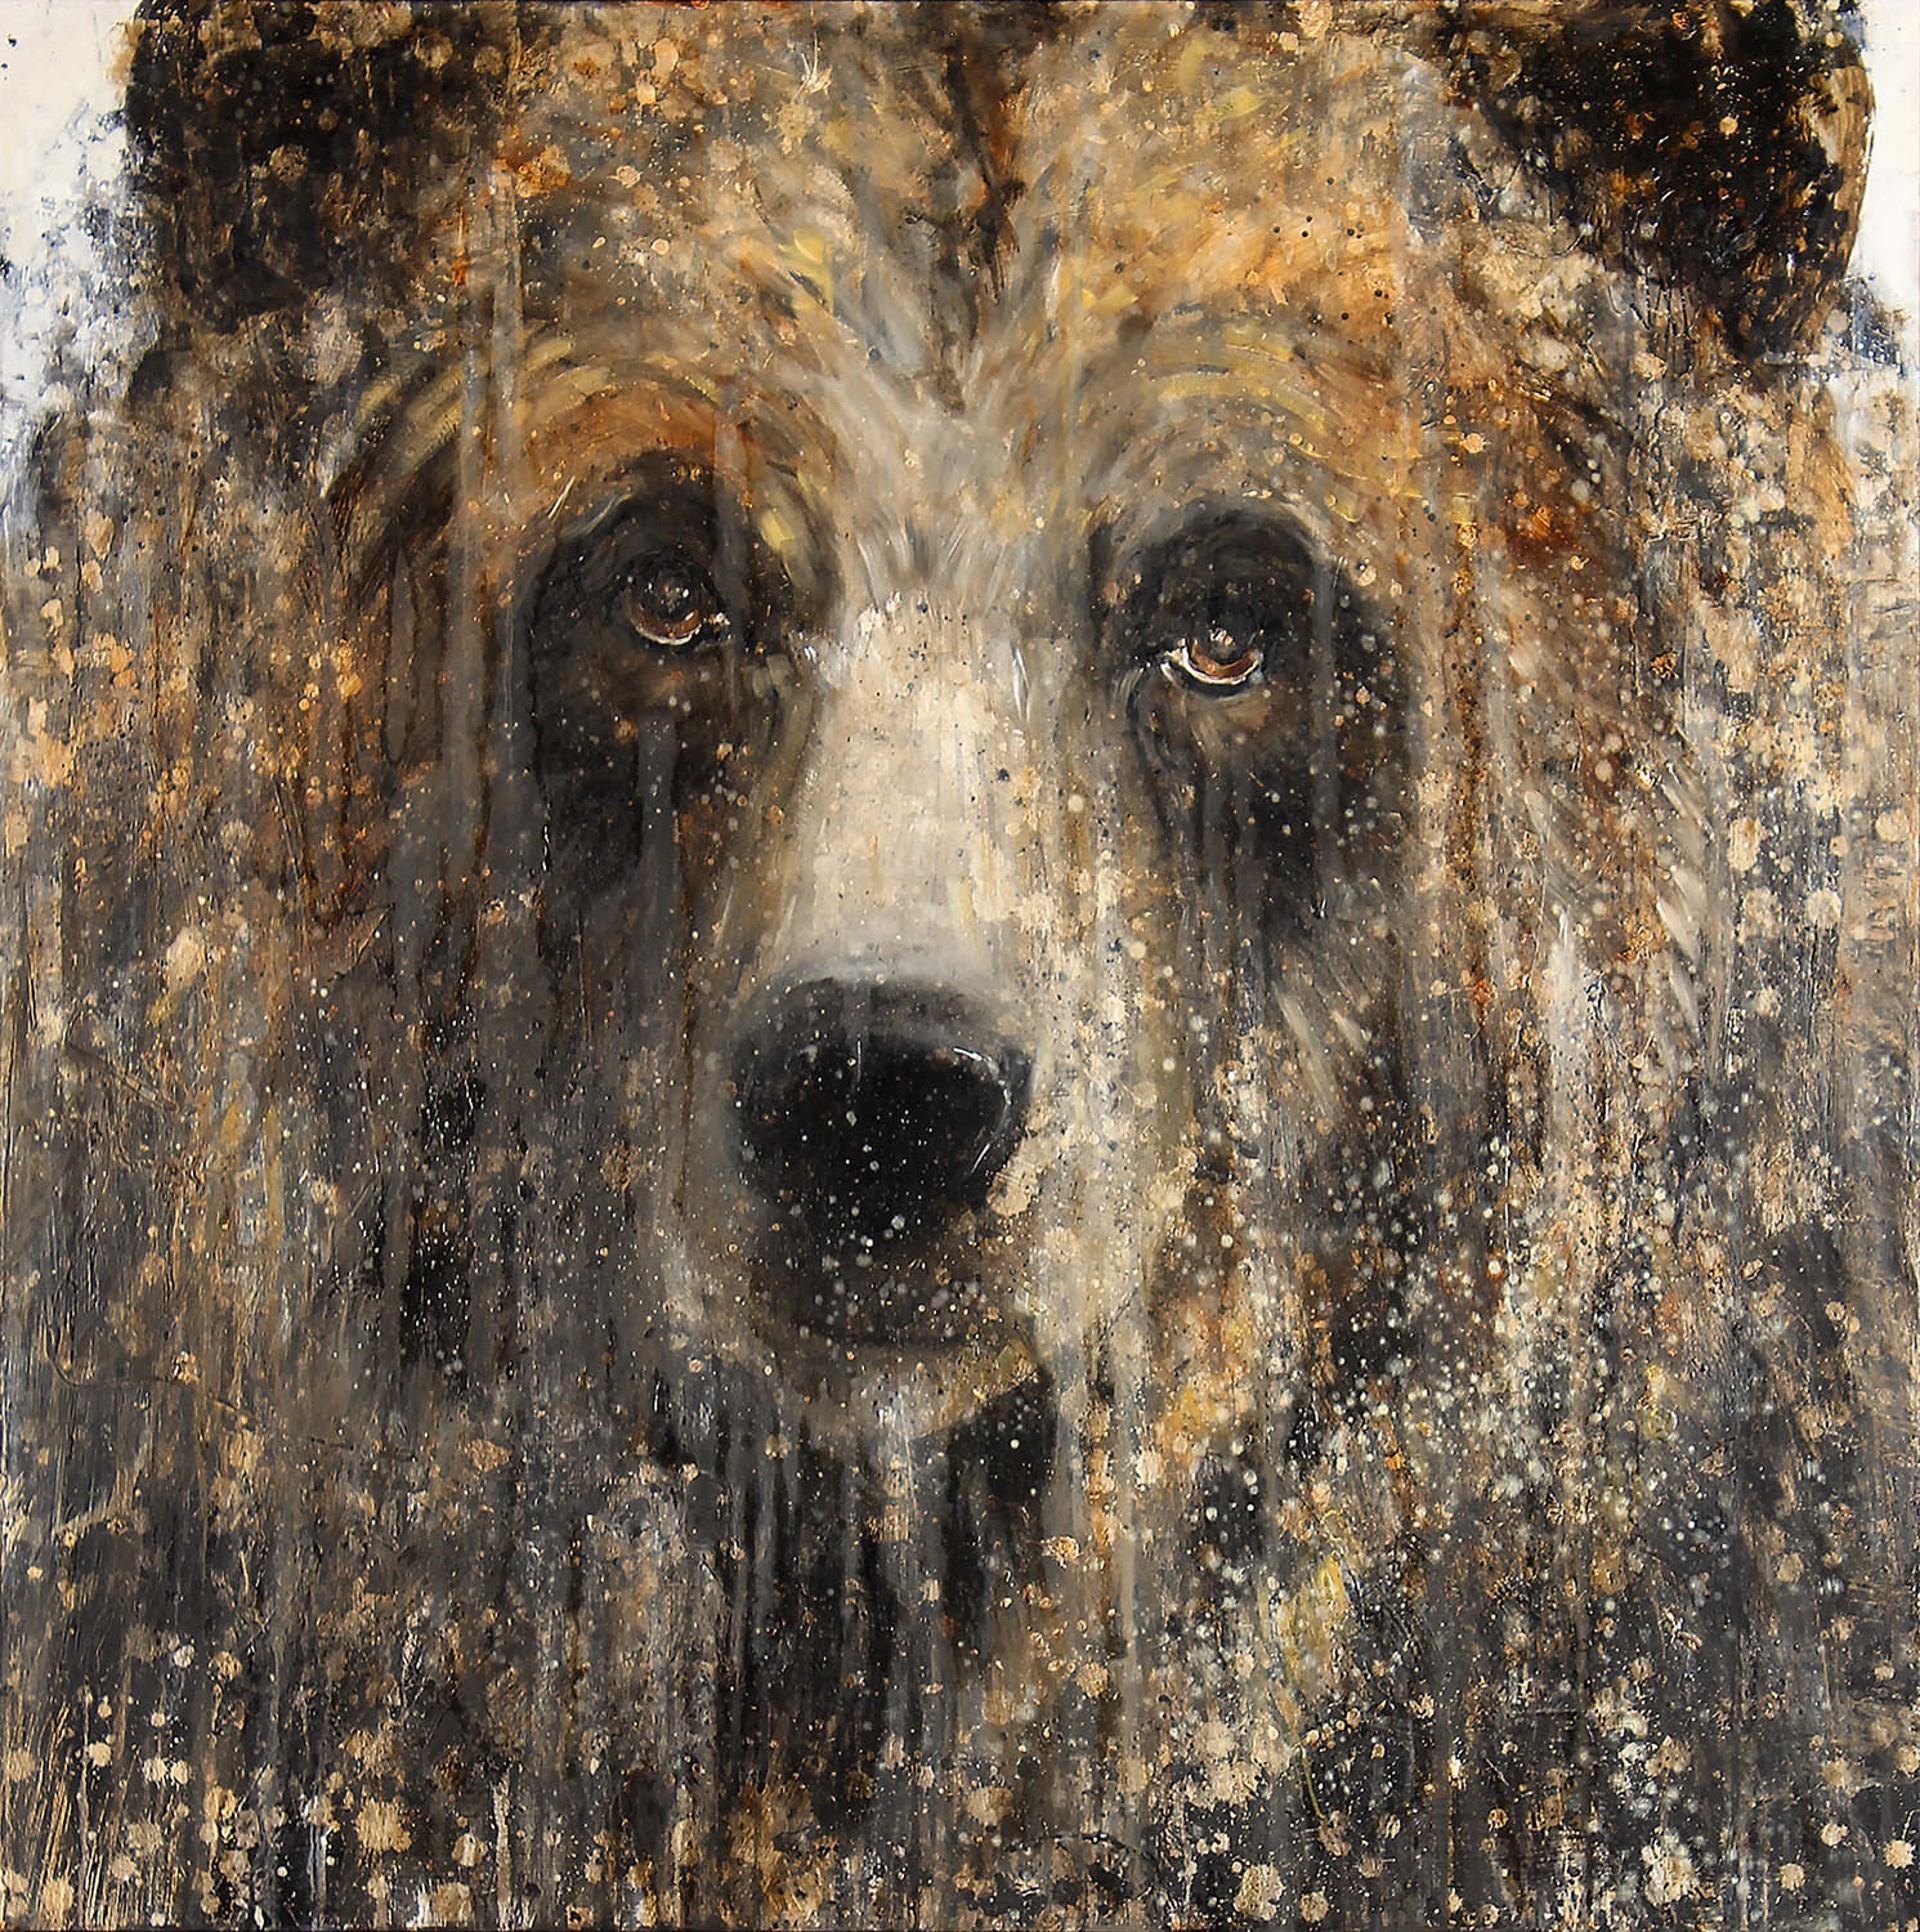 A Contemporary Painting Of A Grizzly Bear With Neutral Elements By Matt Flint At Gallery Wild